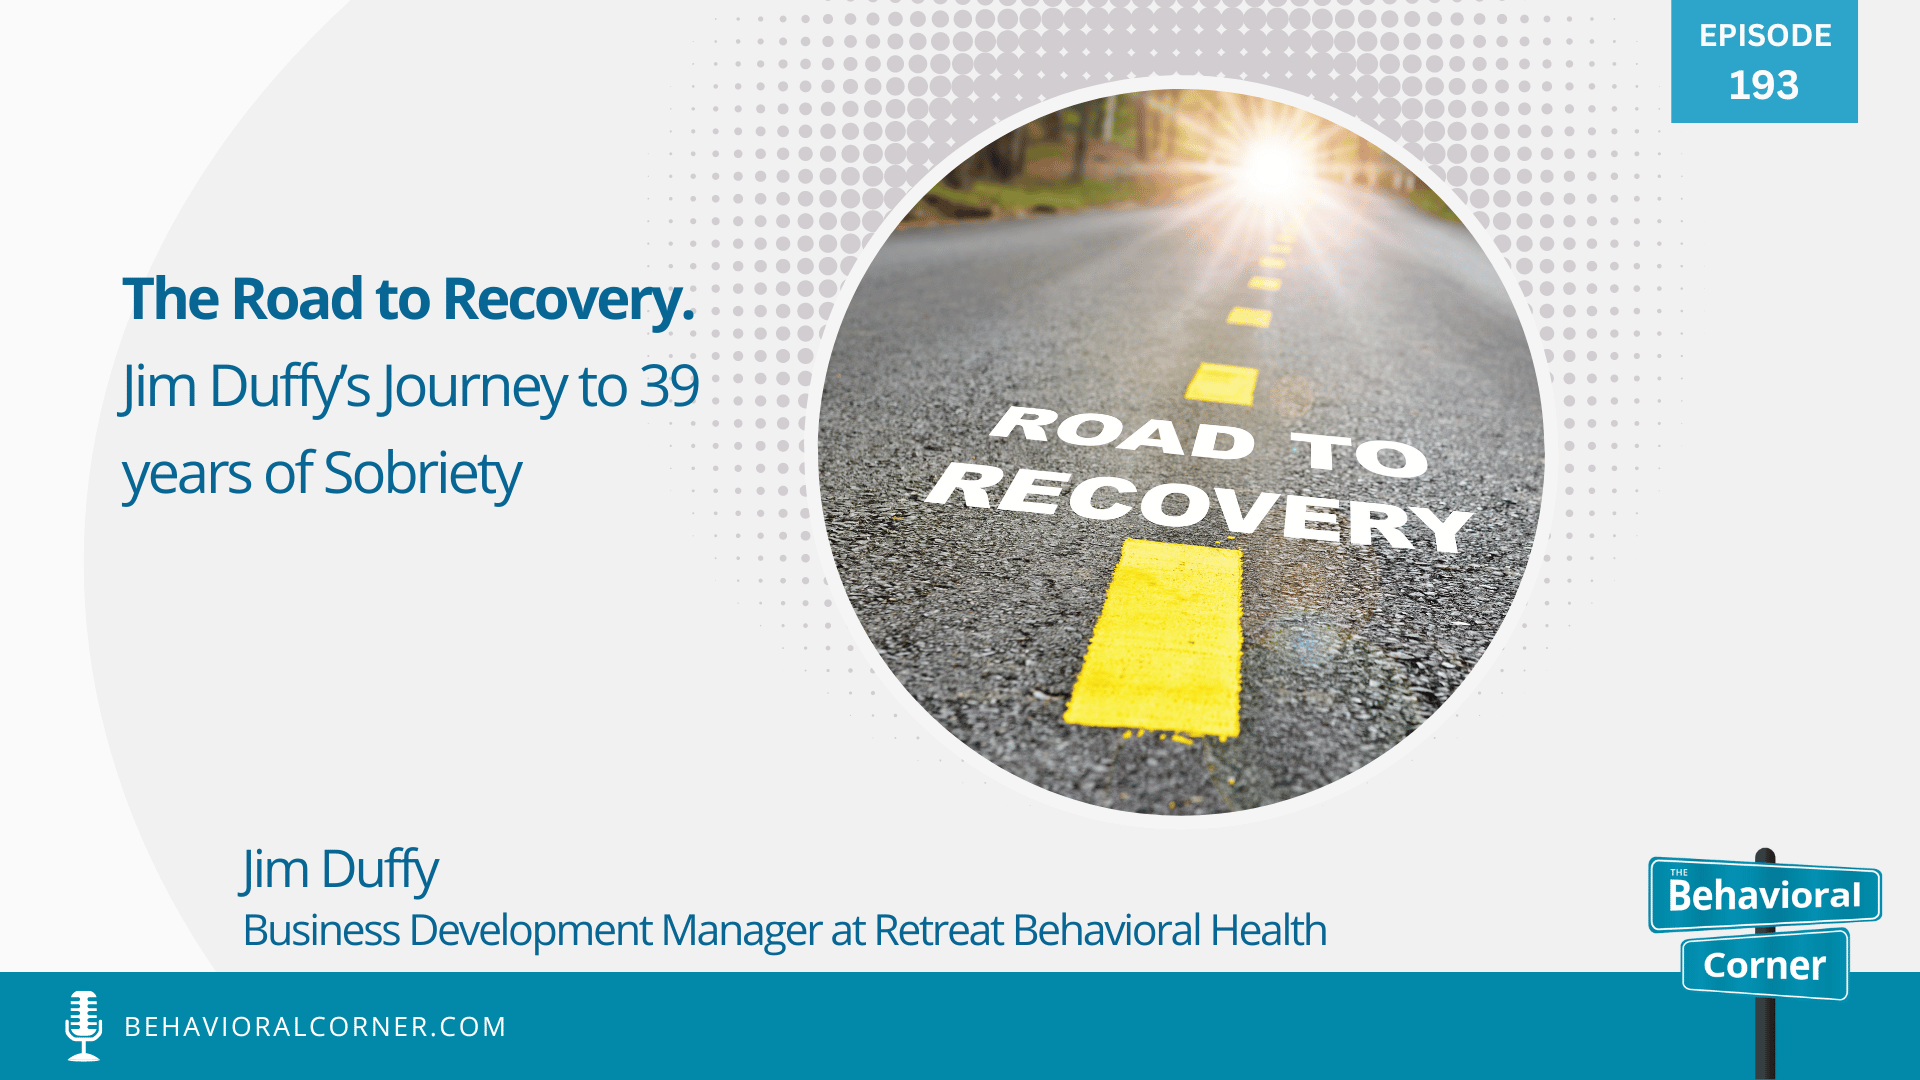 The Road to Recovery. Jim Duffy’s Journey to 39 Years of Sobriety